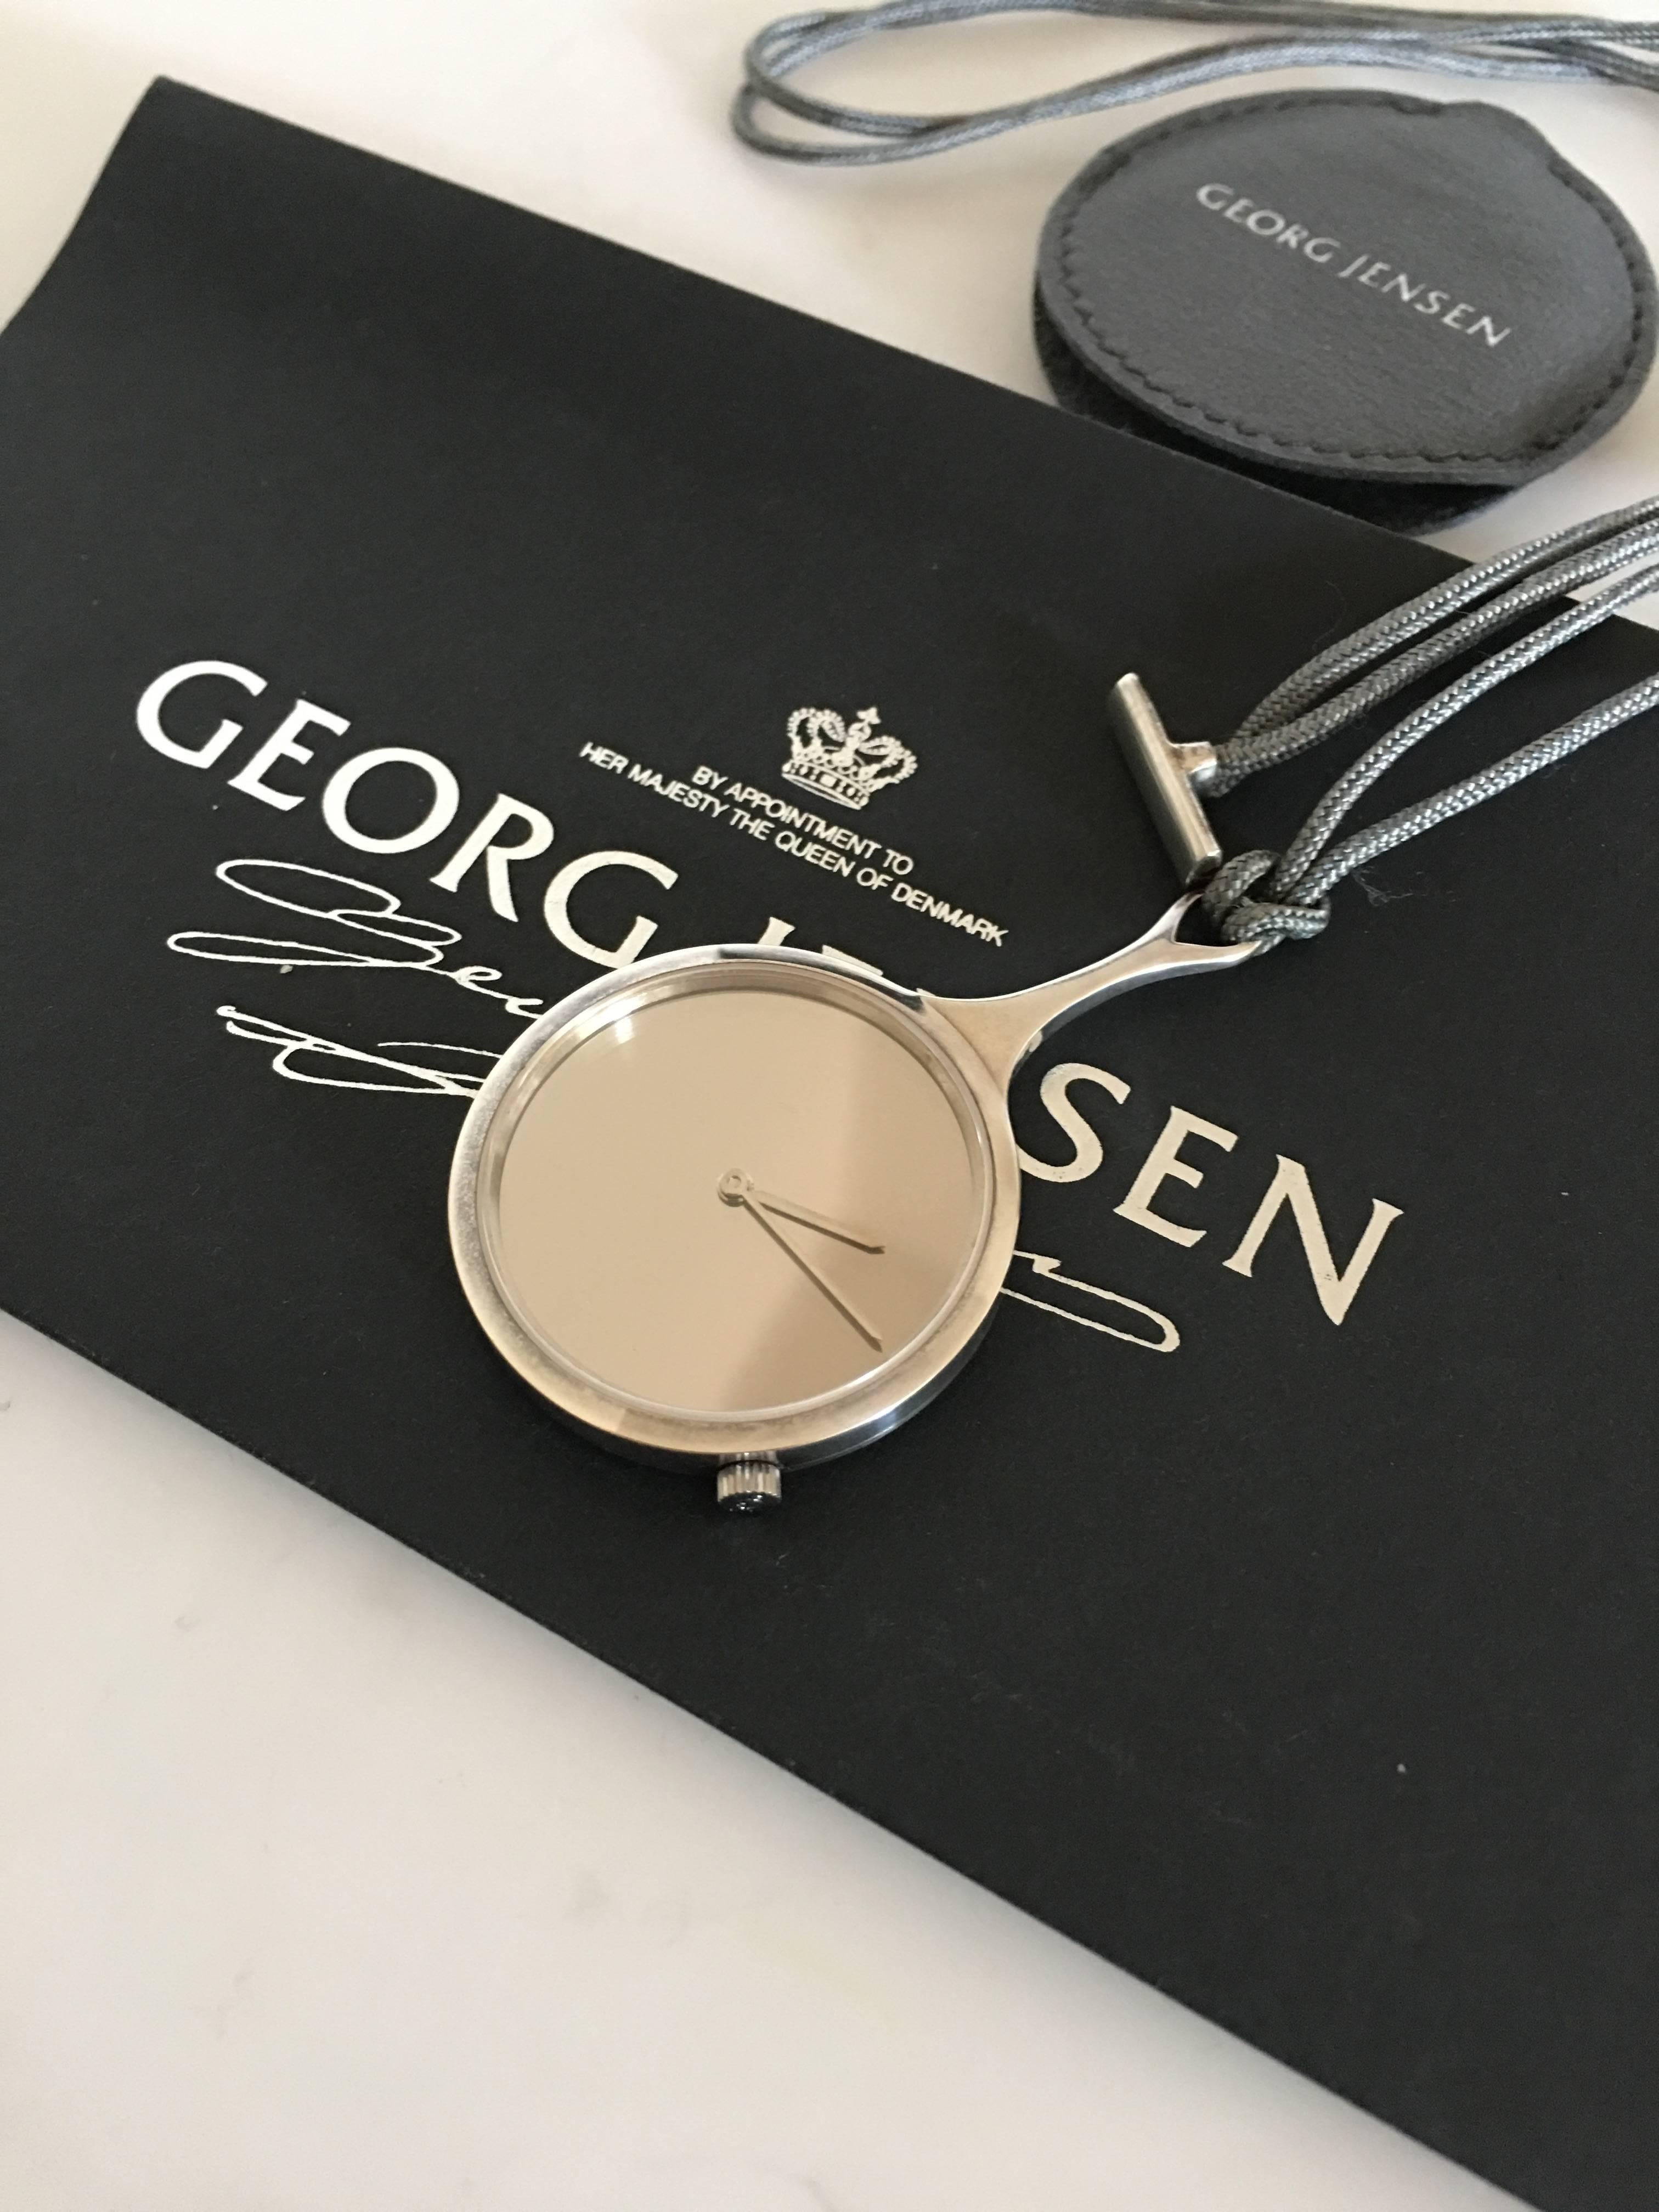 Georg Jensen Swiss made water resistant sterling silver watch pendant no. 2325 designed by Vivianna Torun Bülow-Hübe. Created as a pendant with chain to carry around the neck. 

The watch has a diameter of 3.3 cm (1 19/64